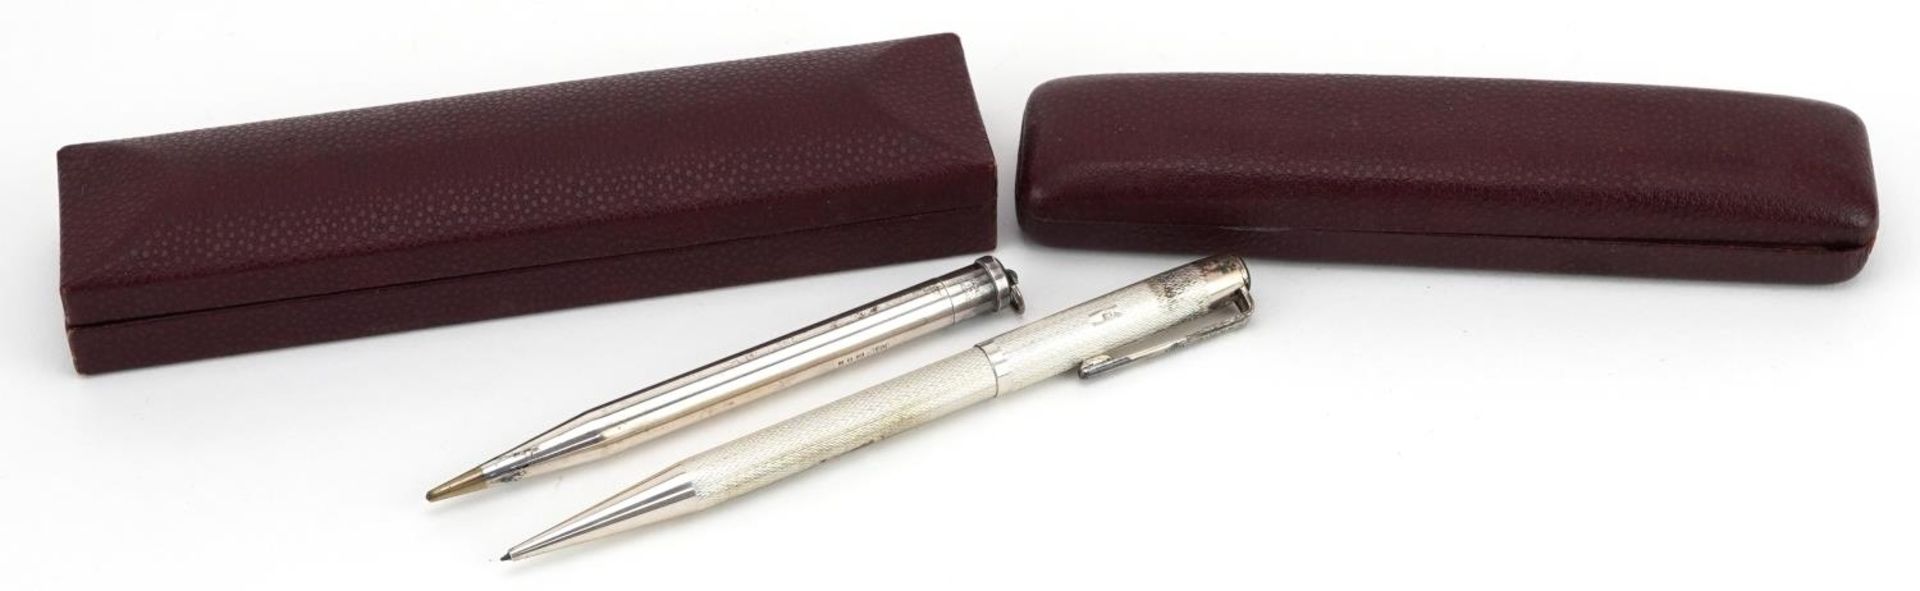 Two silver propelling pencils with cases comprising Yard-O-Led and Yard-O-Lett : For further